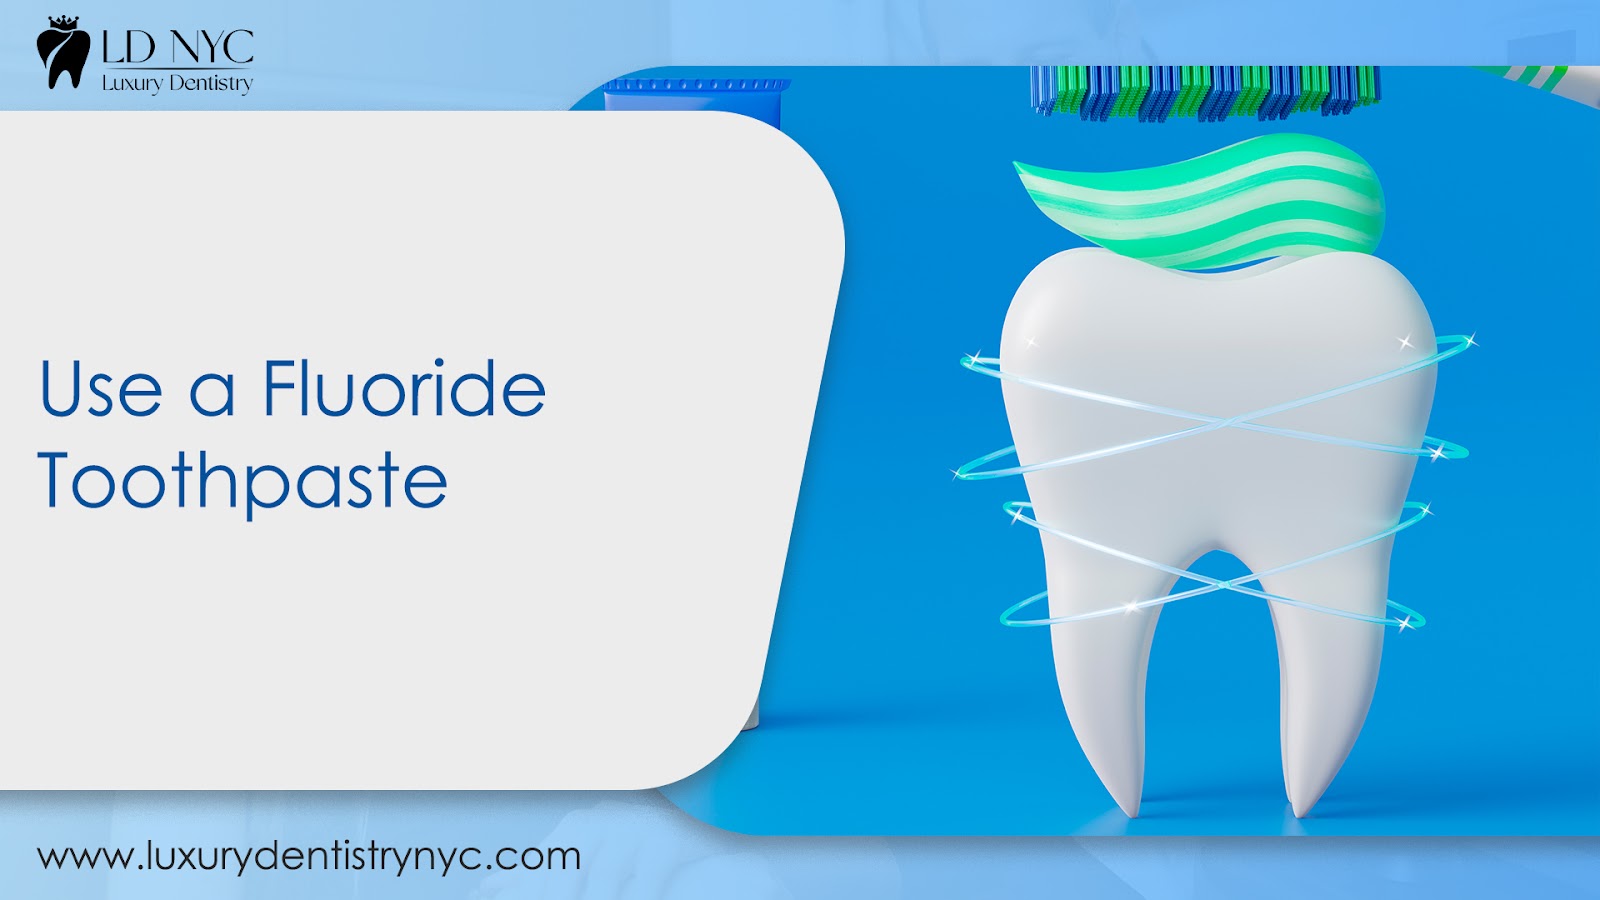 Use a Fluoride Toothpaste